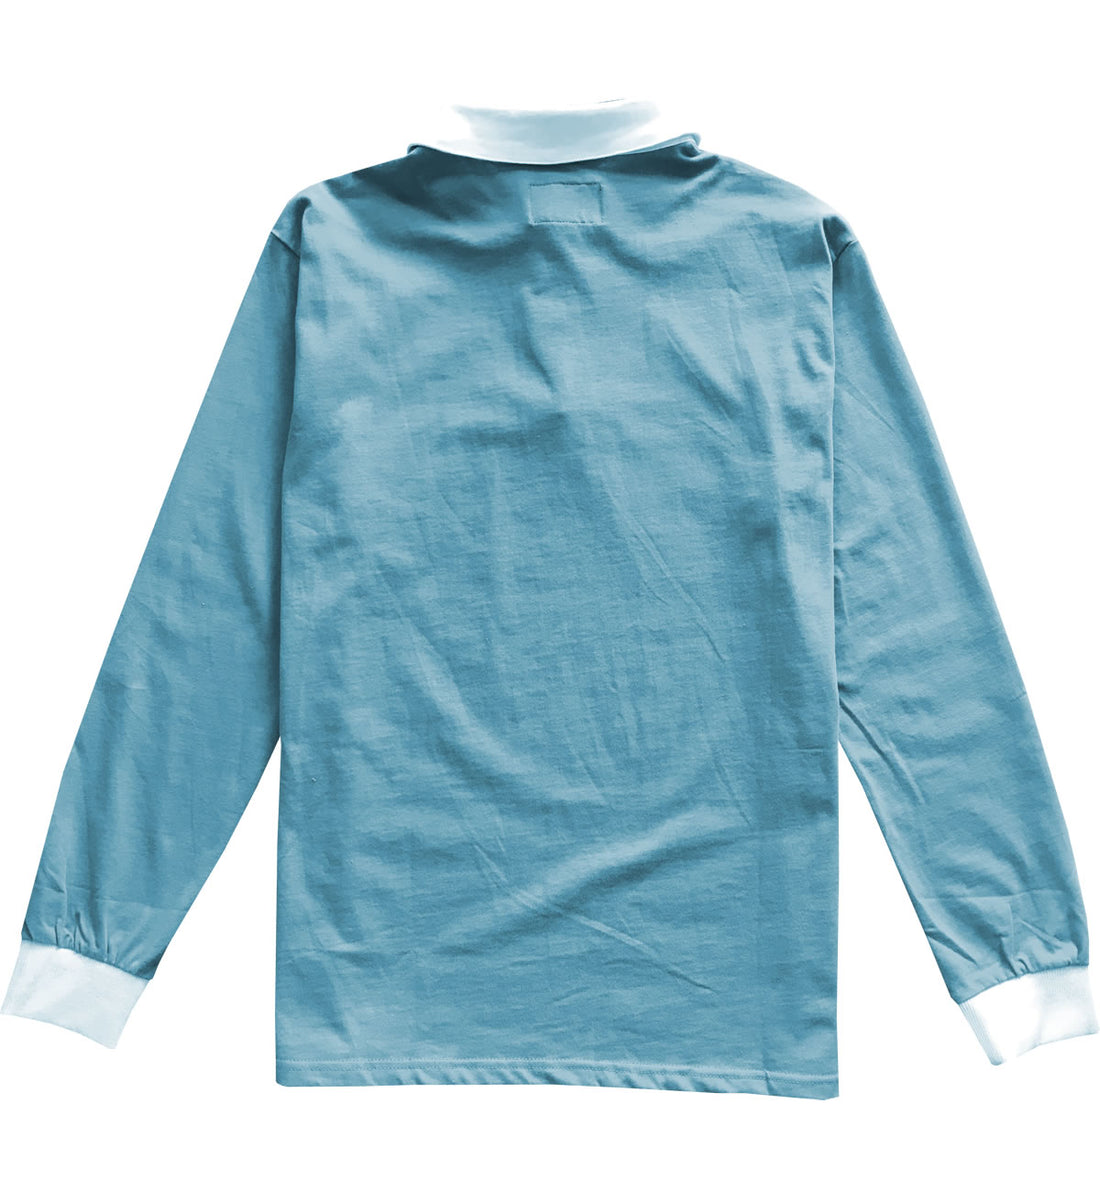 Solid Light Blue with White Collar Mens Long Sleeve Polo Rugby Shirt